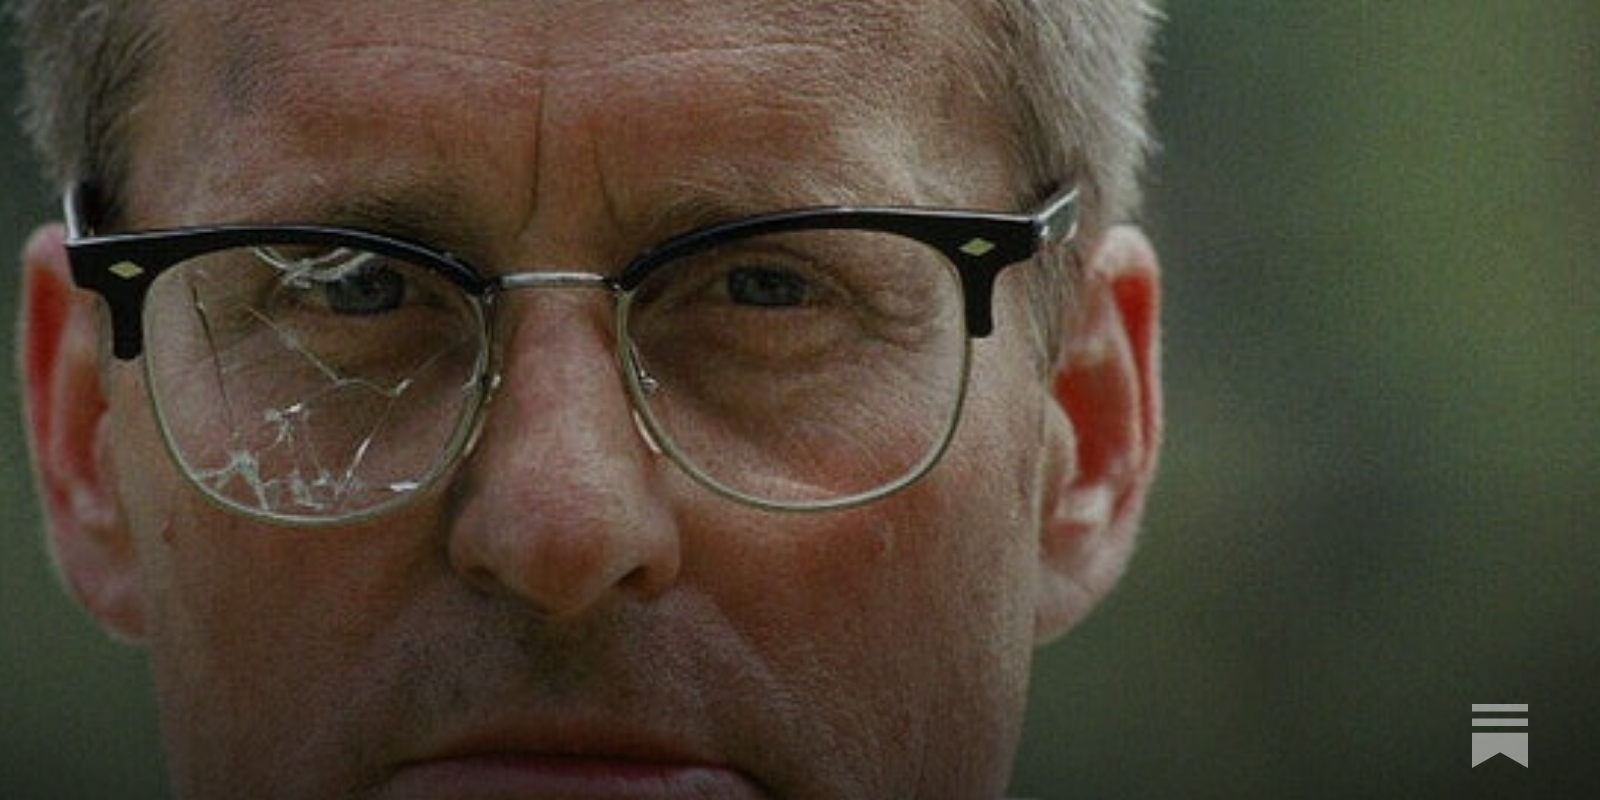 Falling Down: How the film was a forerunner for Trump voters